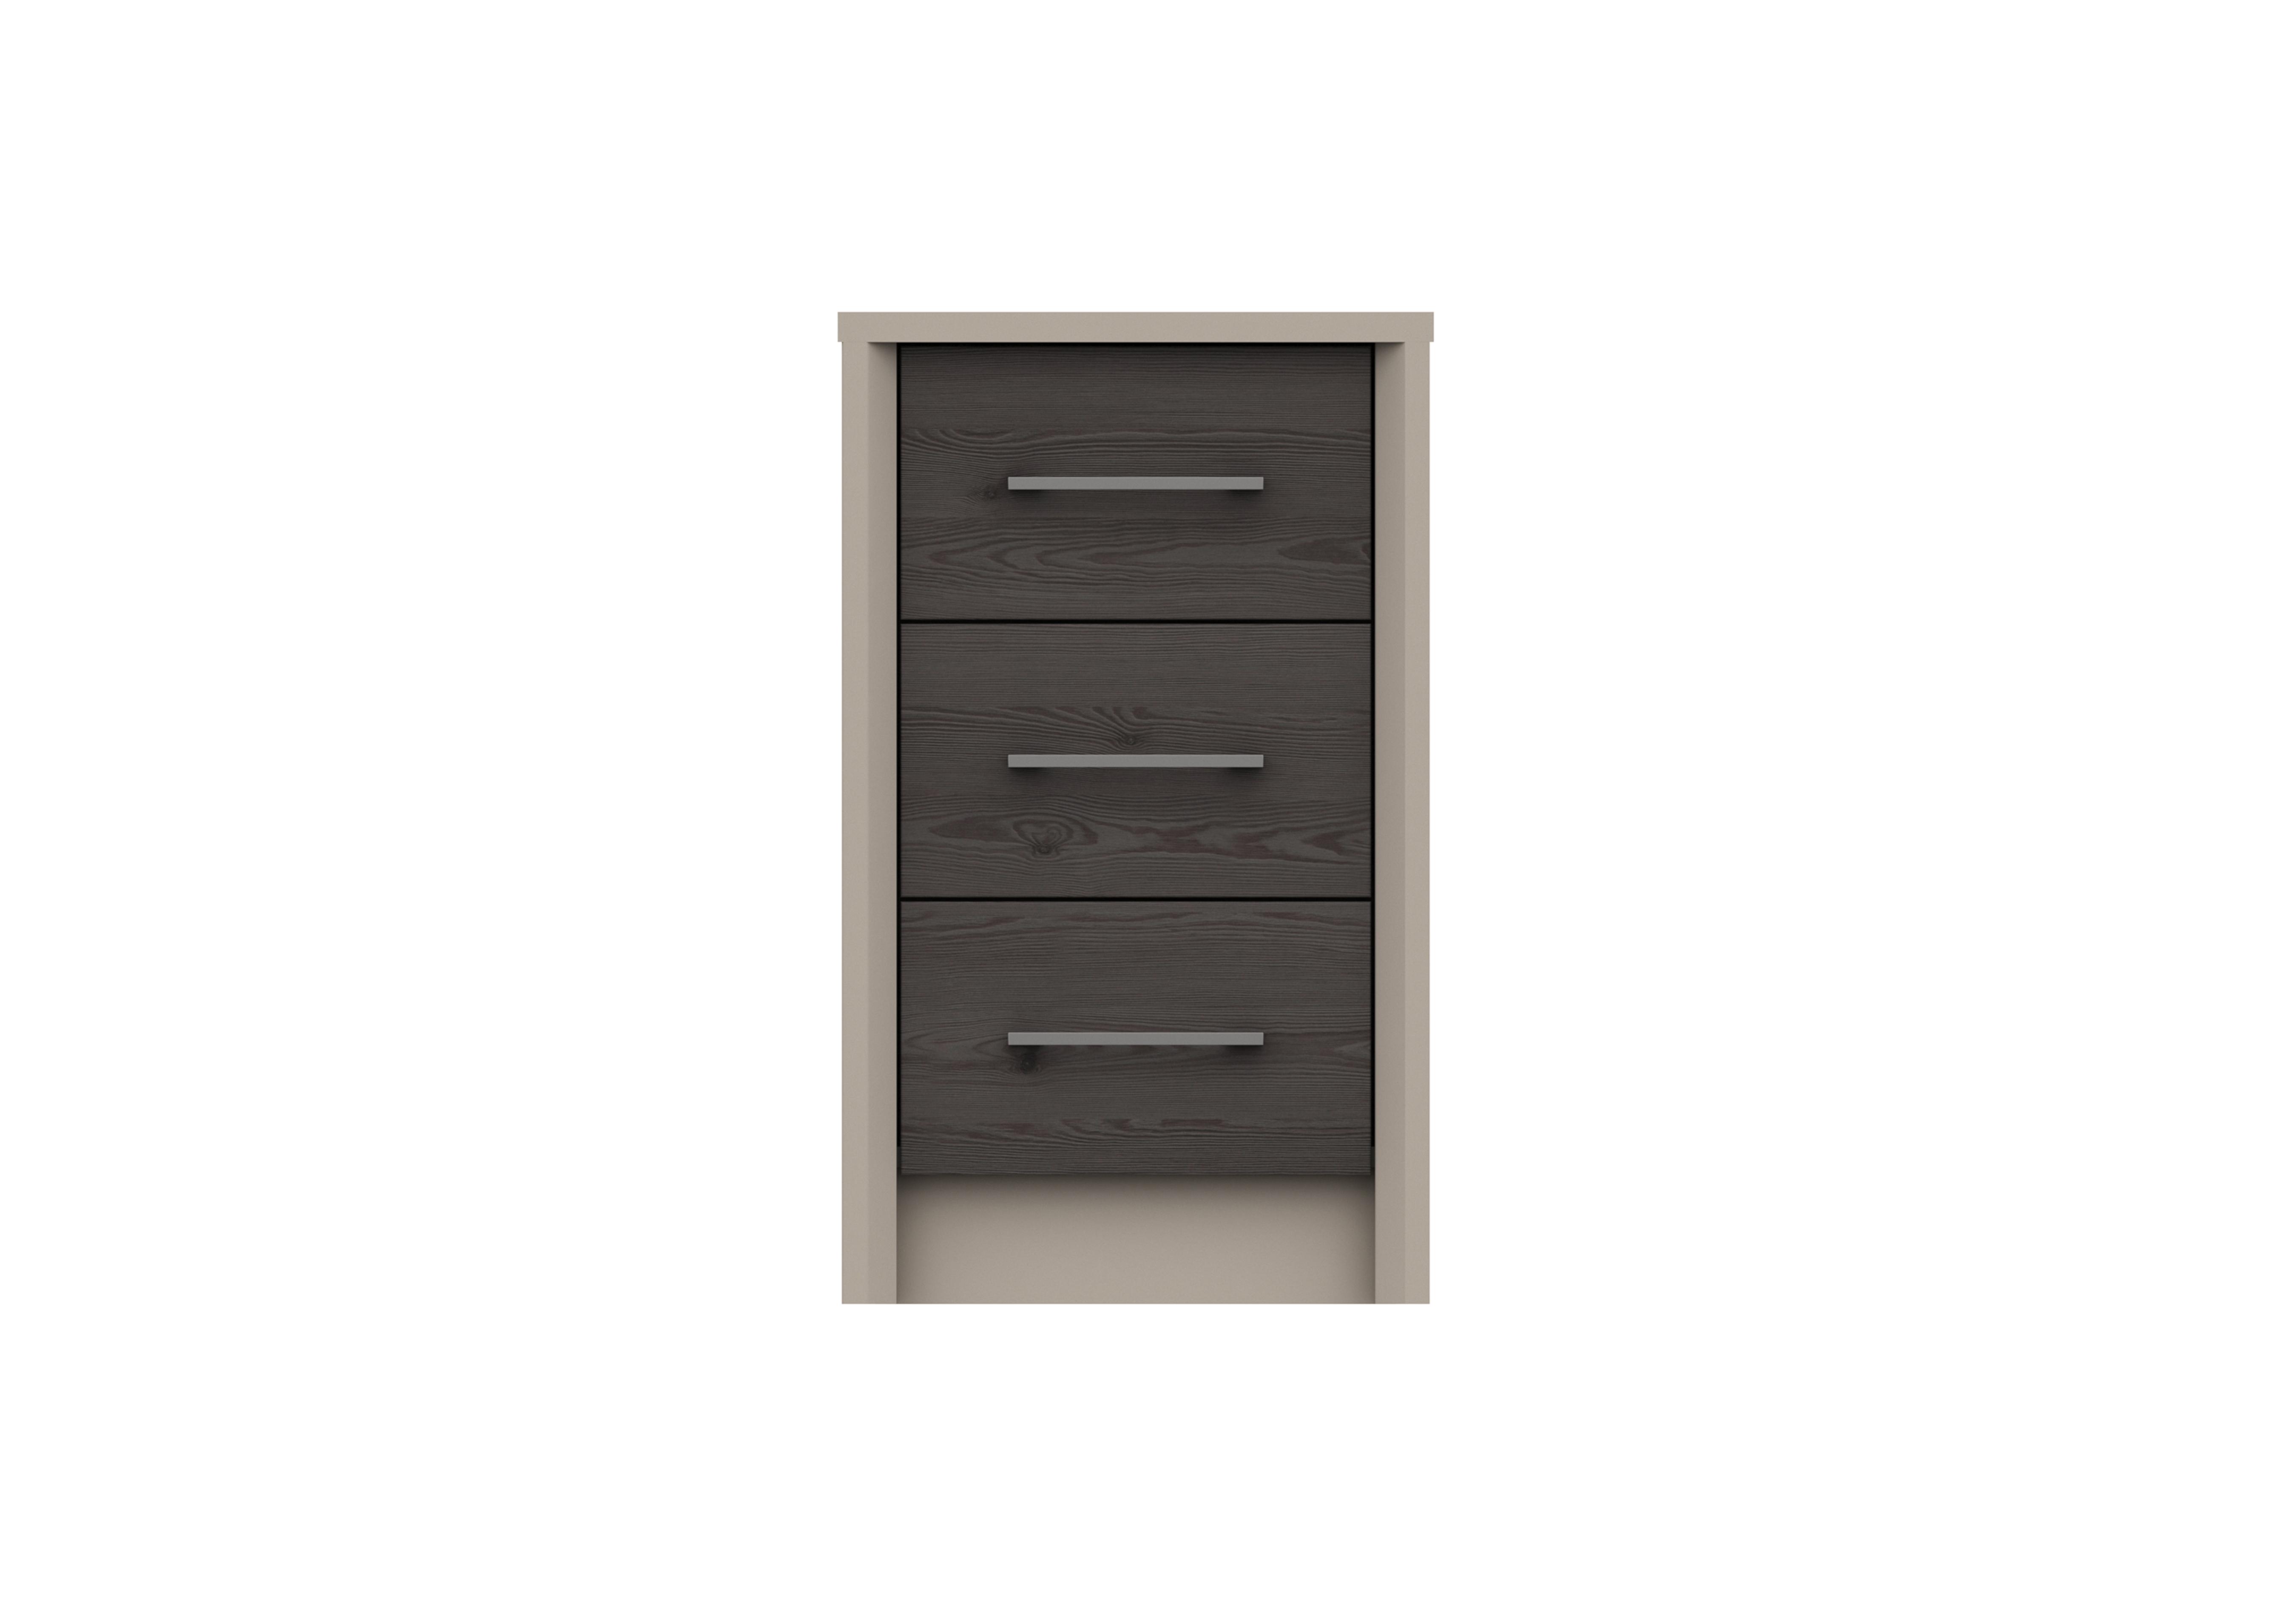 Paddington 3 Drawer Bedside Chest in Fired Earth/Anthracite Larch on Furniture Village